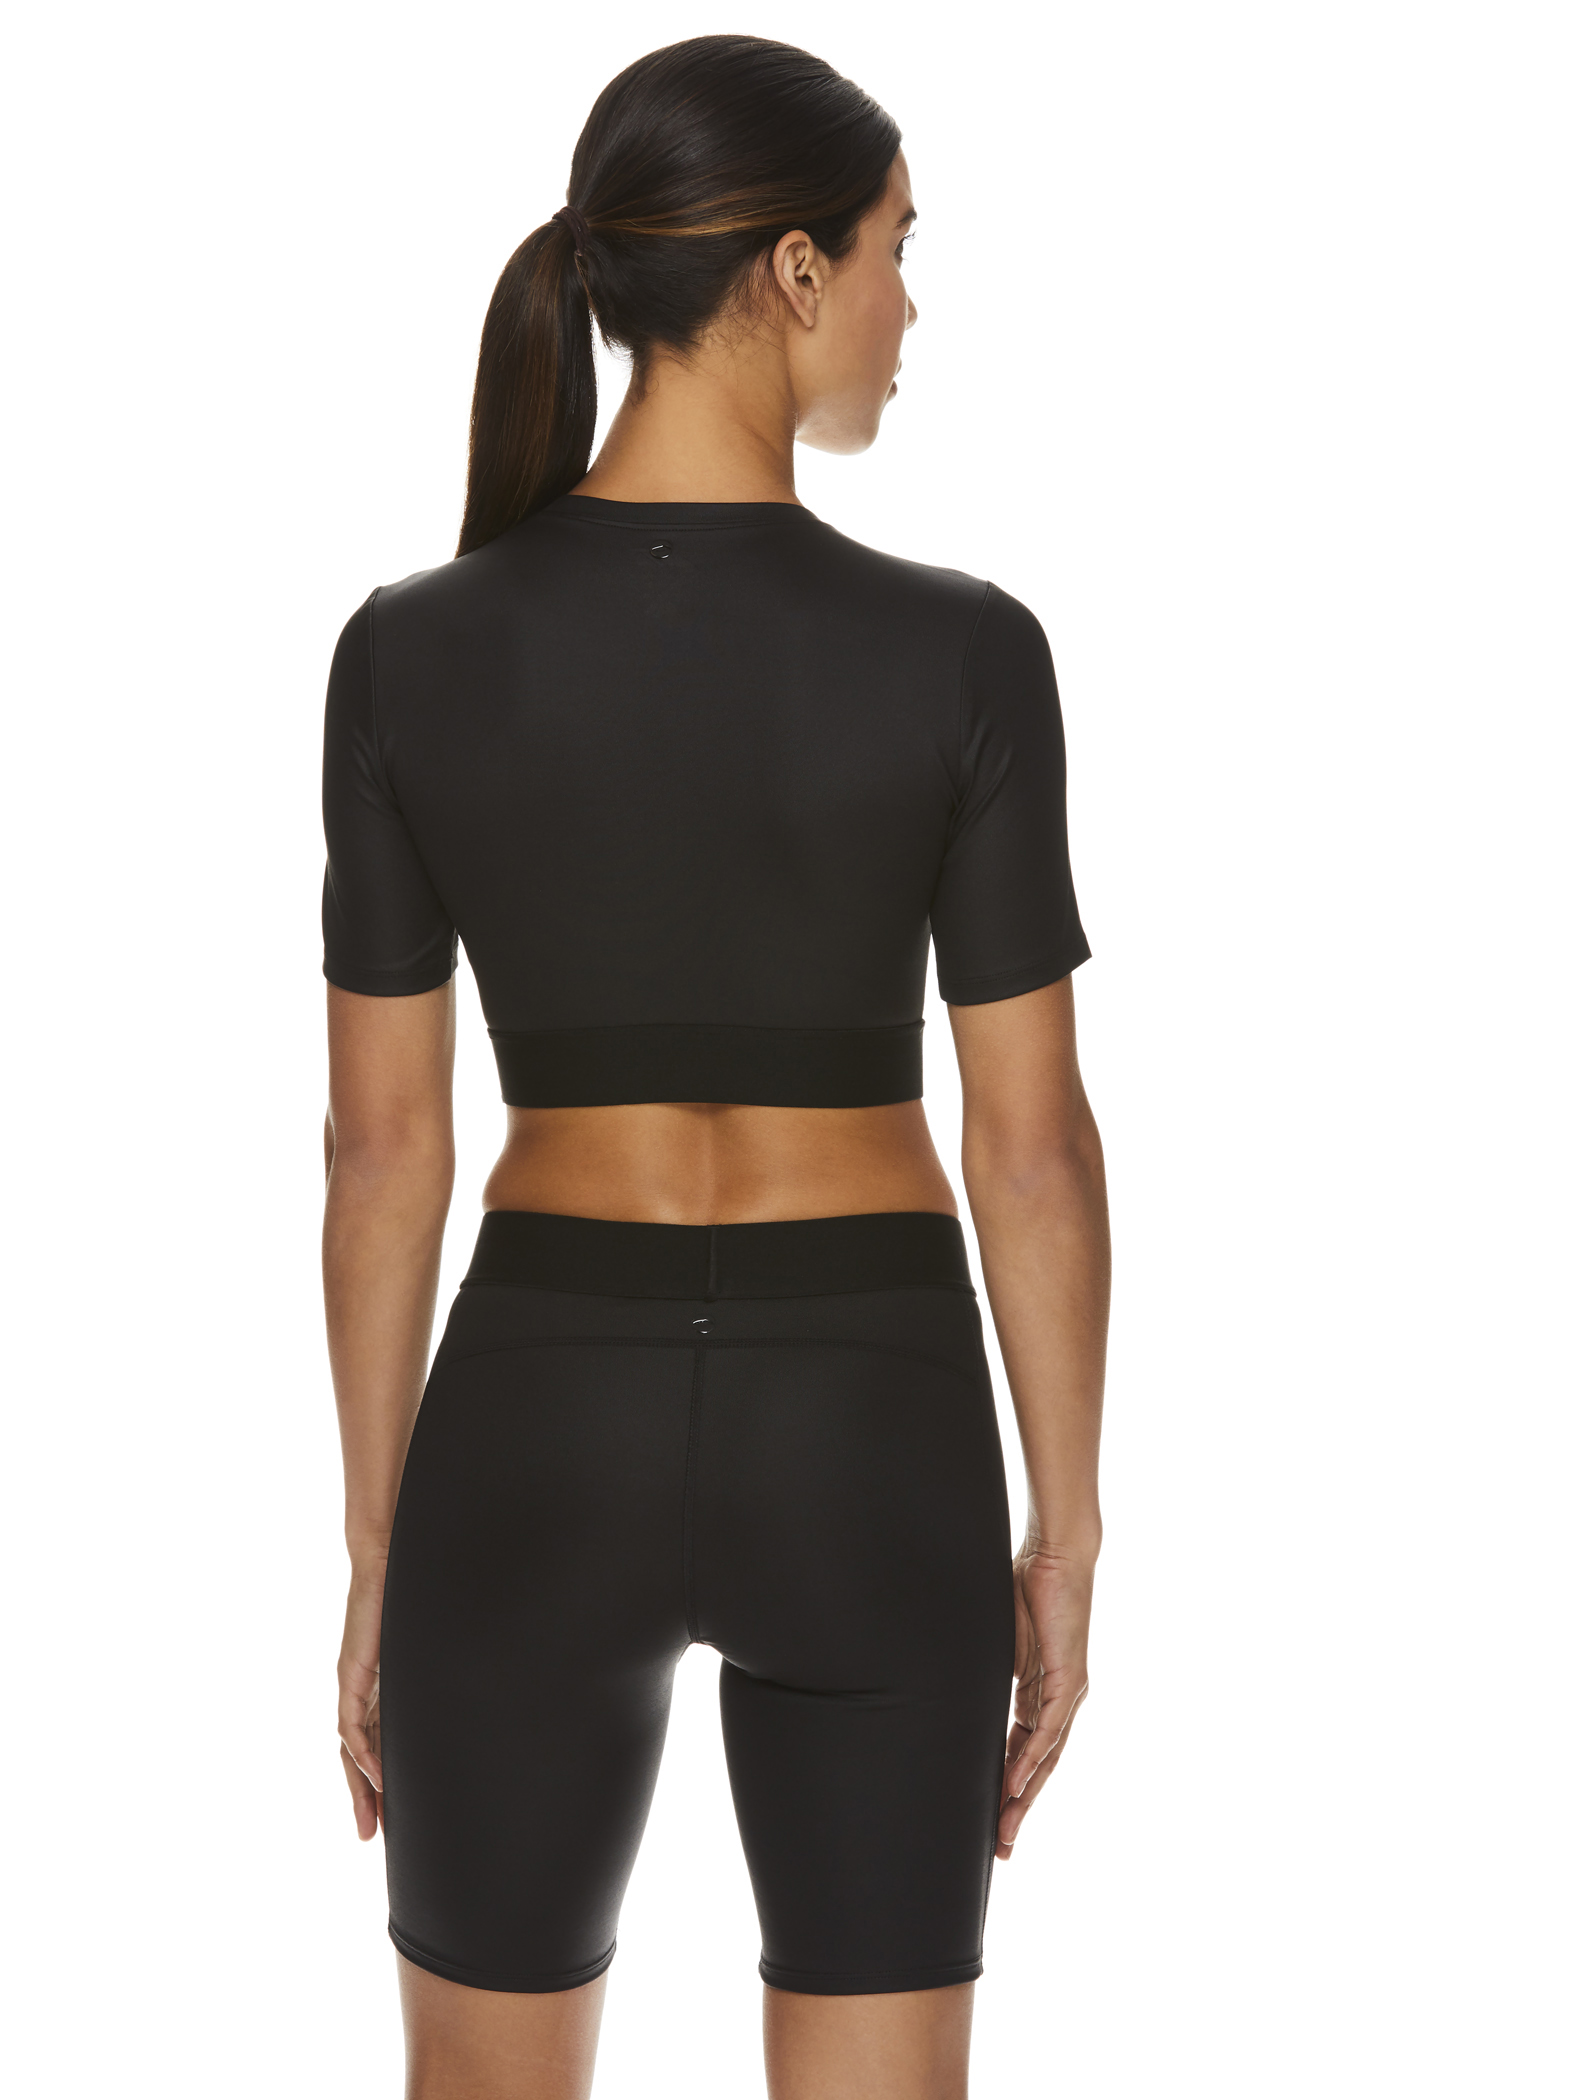 Avia Women's Active Ready Set Glow Cropped Tee - image 3 of 4